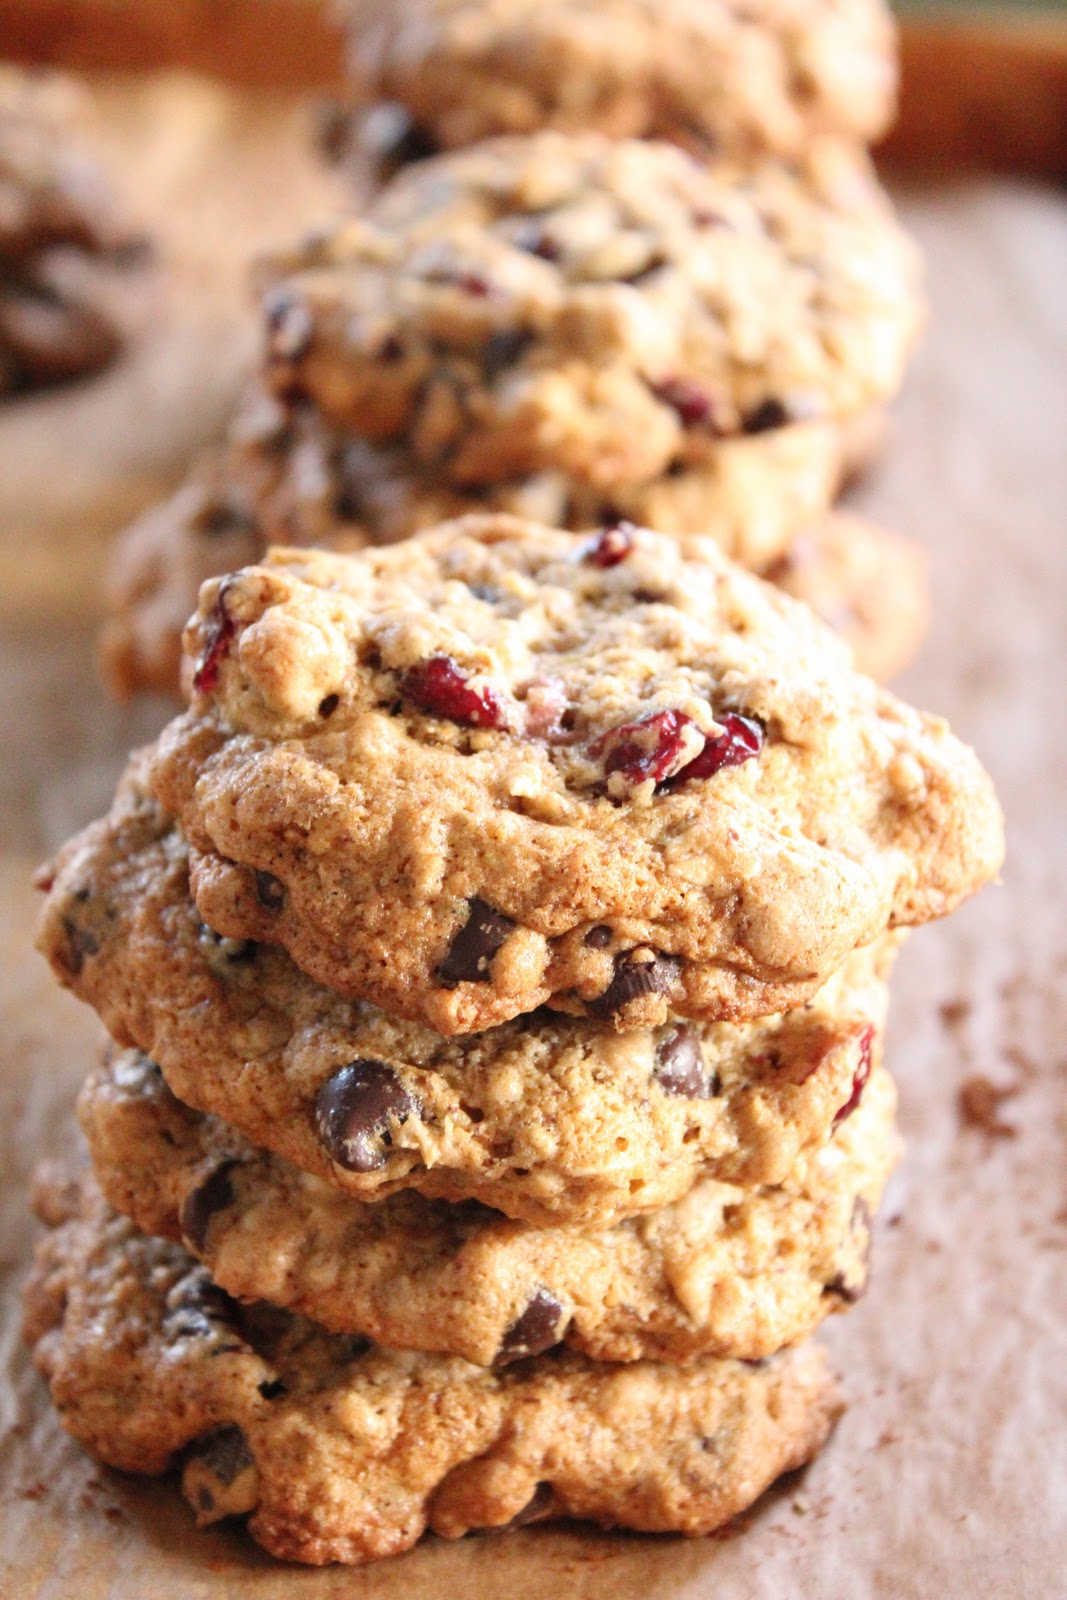 Chocolate Chip Cranberry Flax Cookies - Eat Good 4 Life